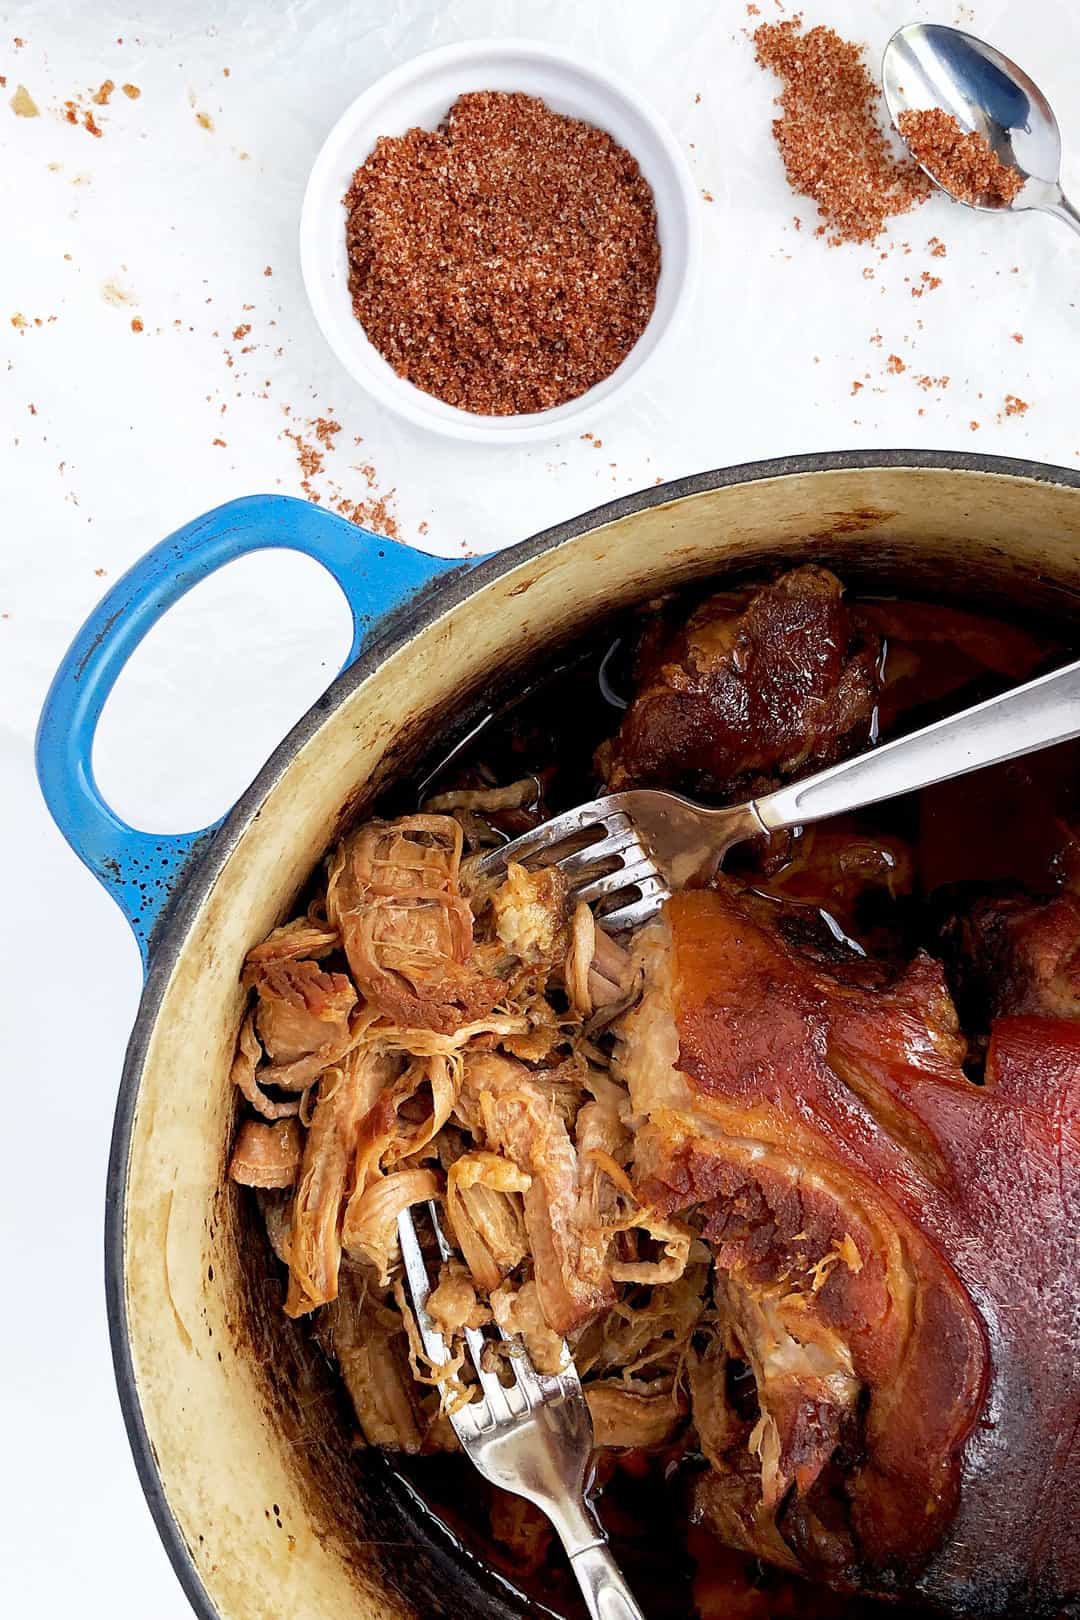 Oven slow cooked pulled pork recipe